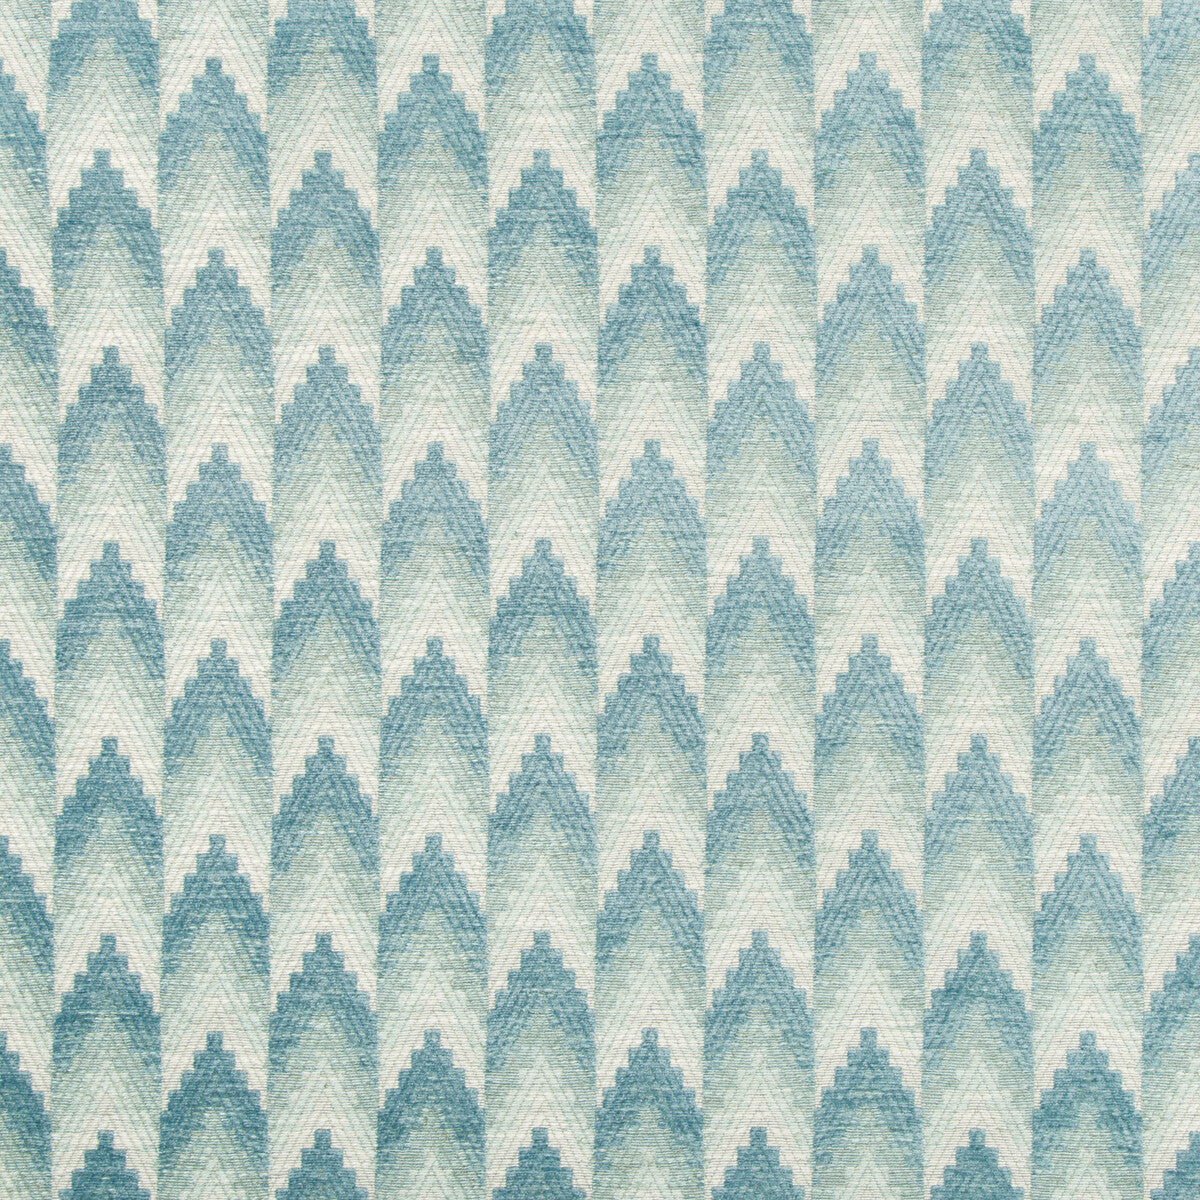 Ventron Woven fabric in aqua color - pattern 8019118.13.0 - by Brunschwig &amp; Fils in the Alsace Weaves collection